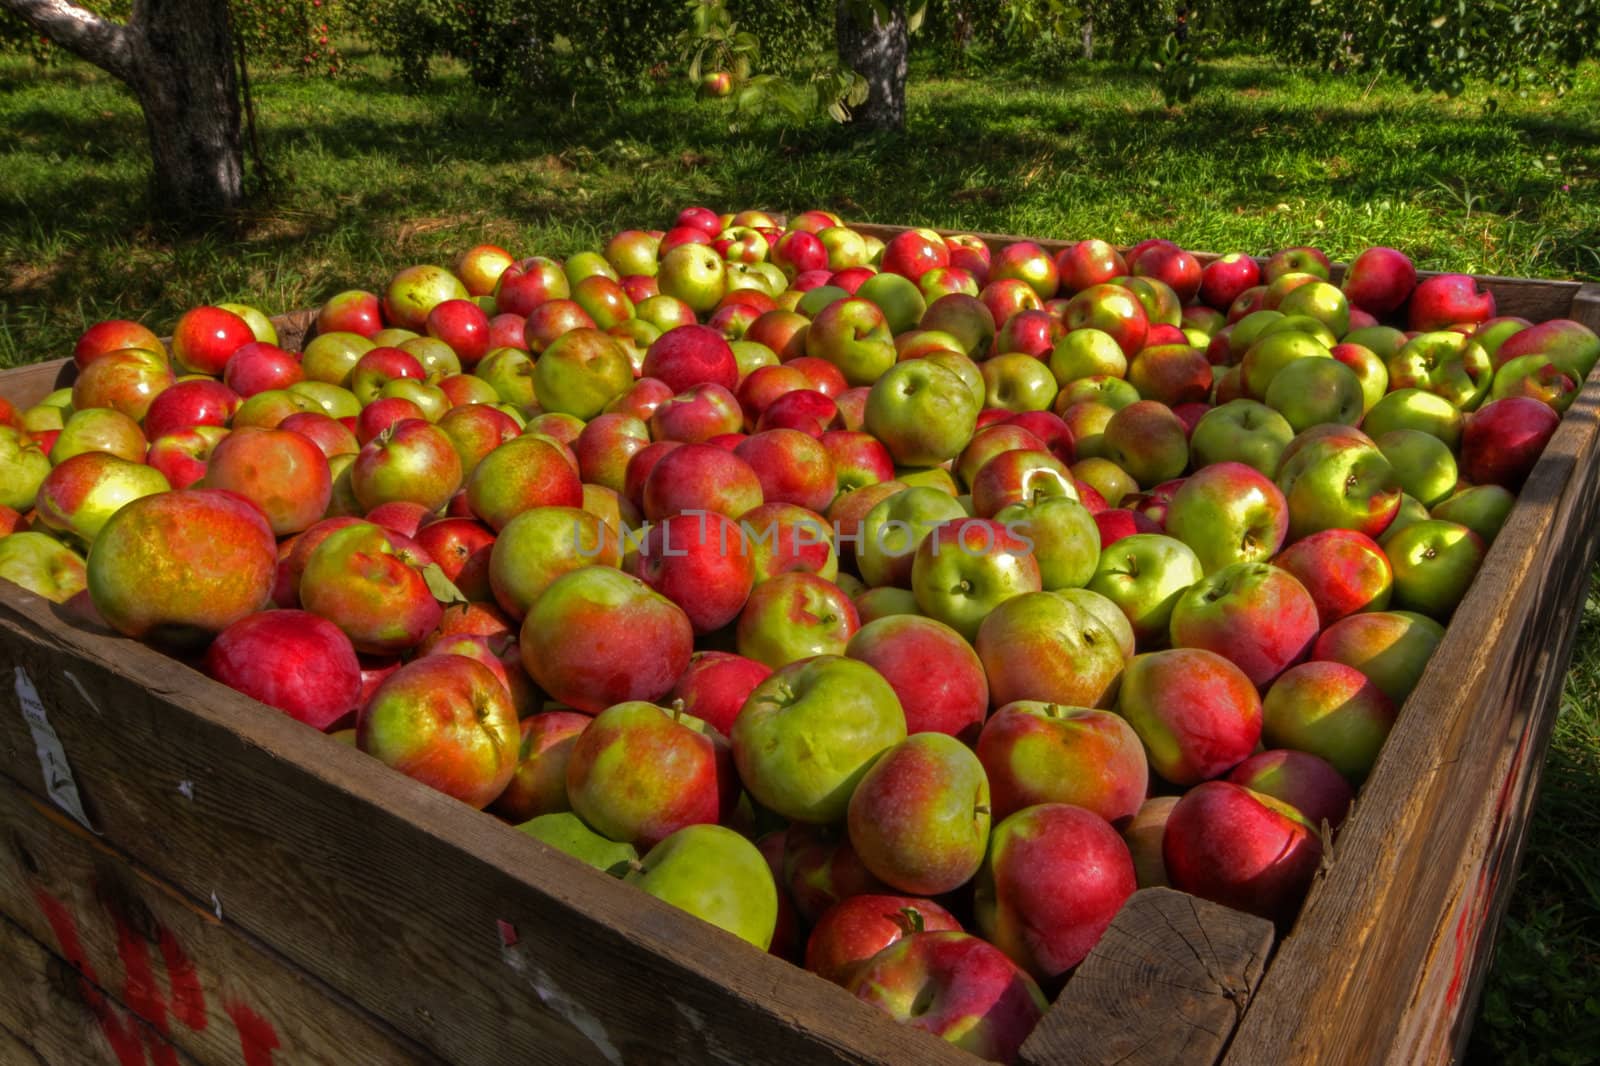 Crate of red apples on a sunny day in apple orchard